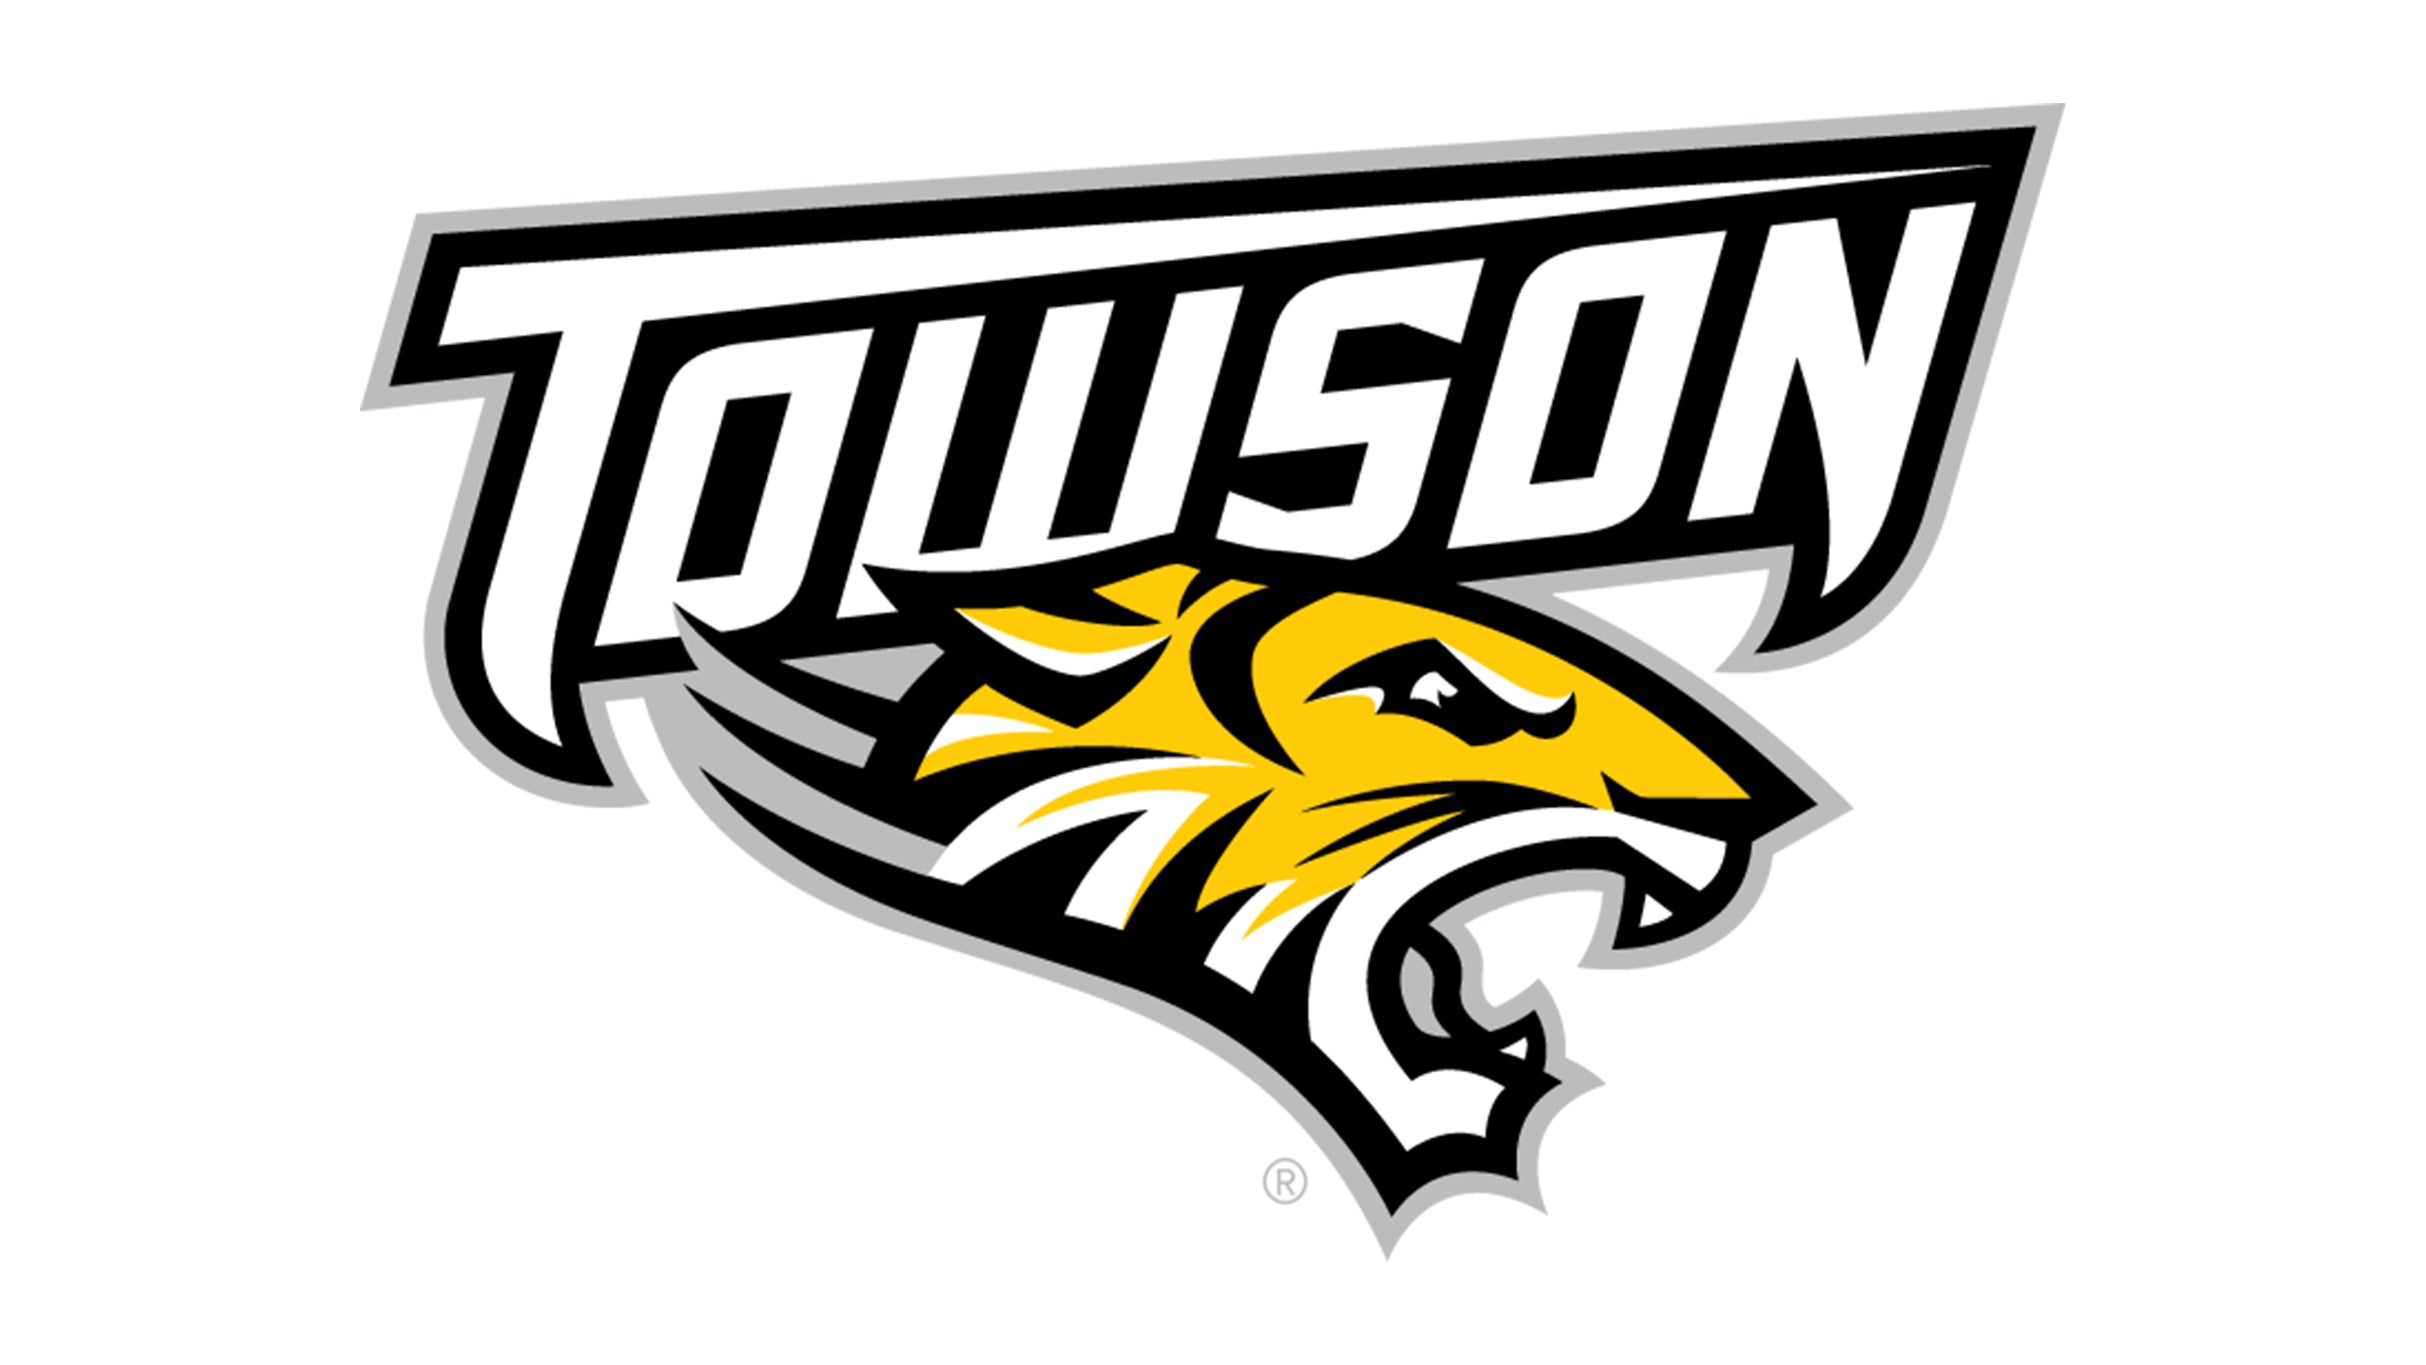 Towson University Tigers Mens Basketball vs. Charleston Cougars Mens Basketball in Towson promo photo for $10 presale offer code